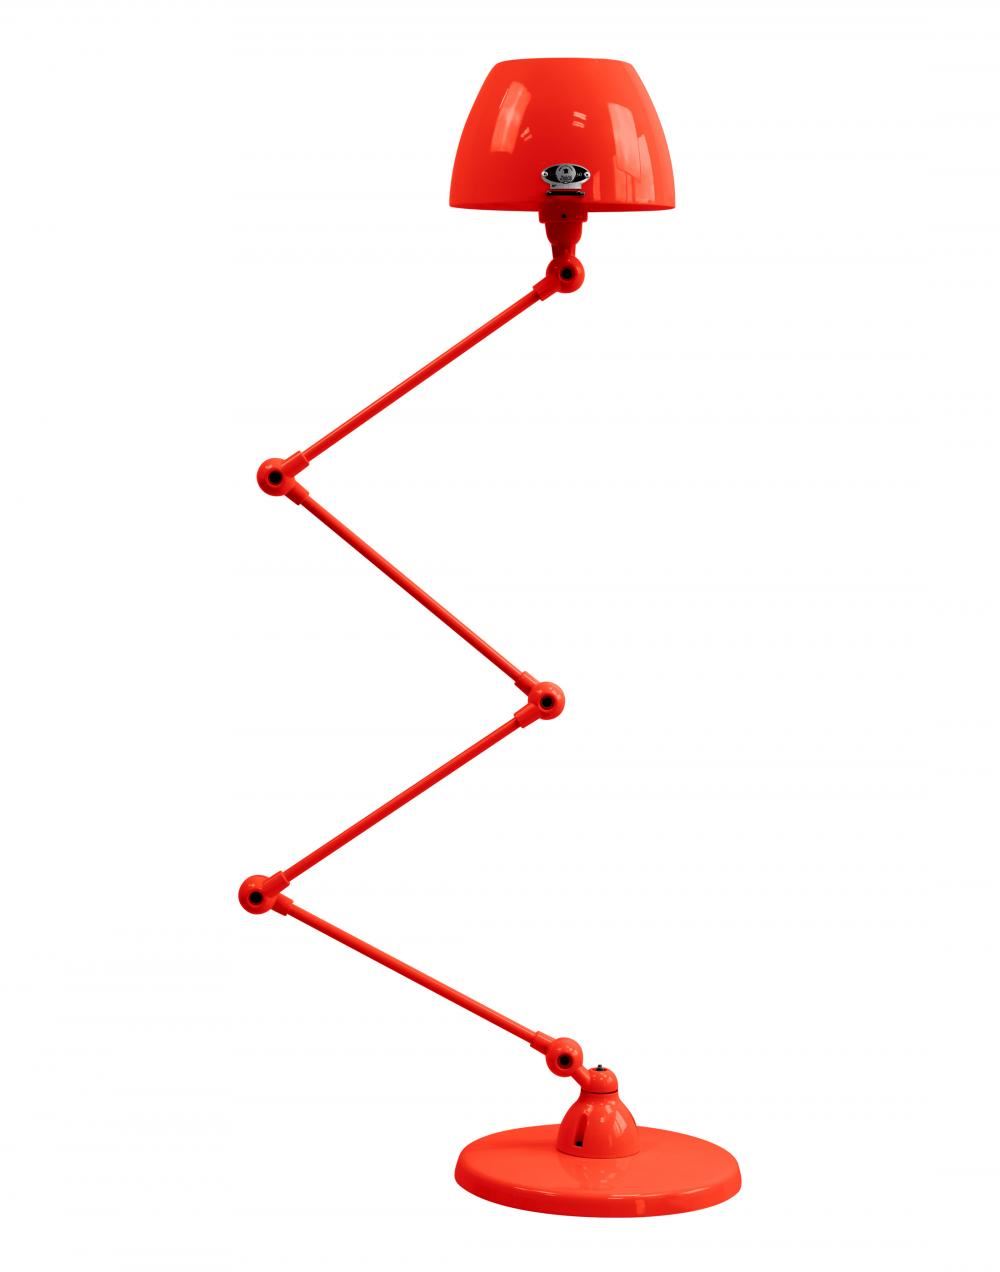 Jielde Aicler Zigzag 4 Arm Desk Or Floor Light Curved Shade Red Gloss